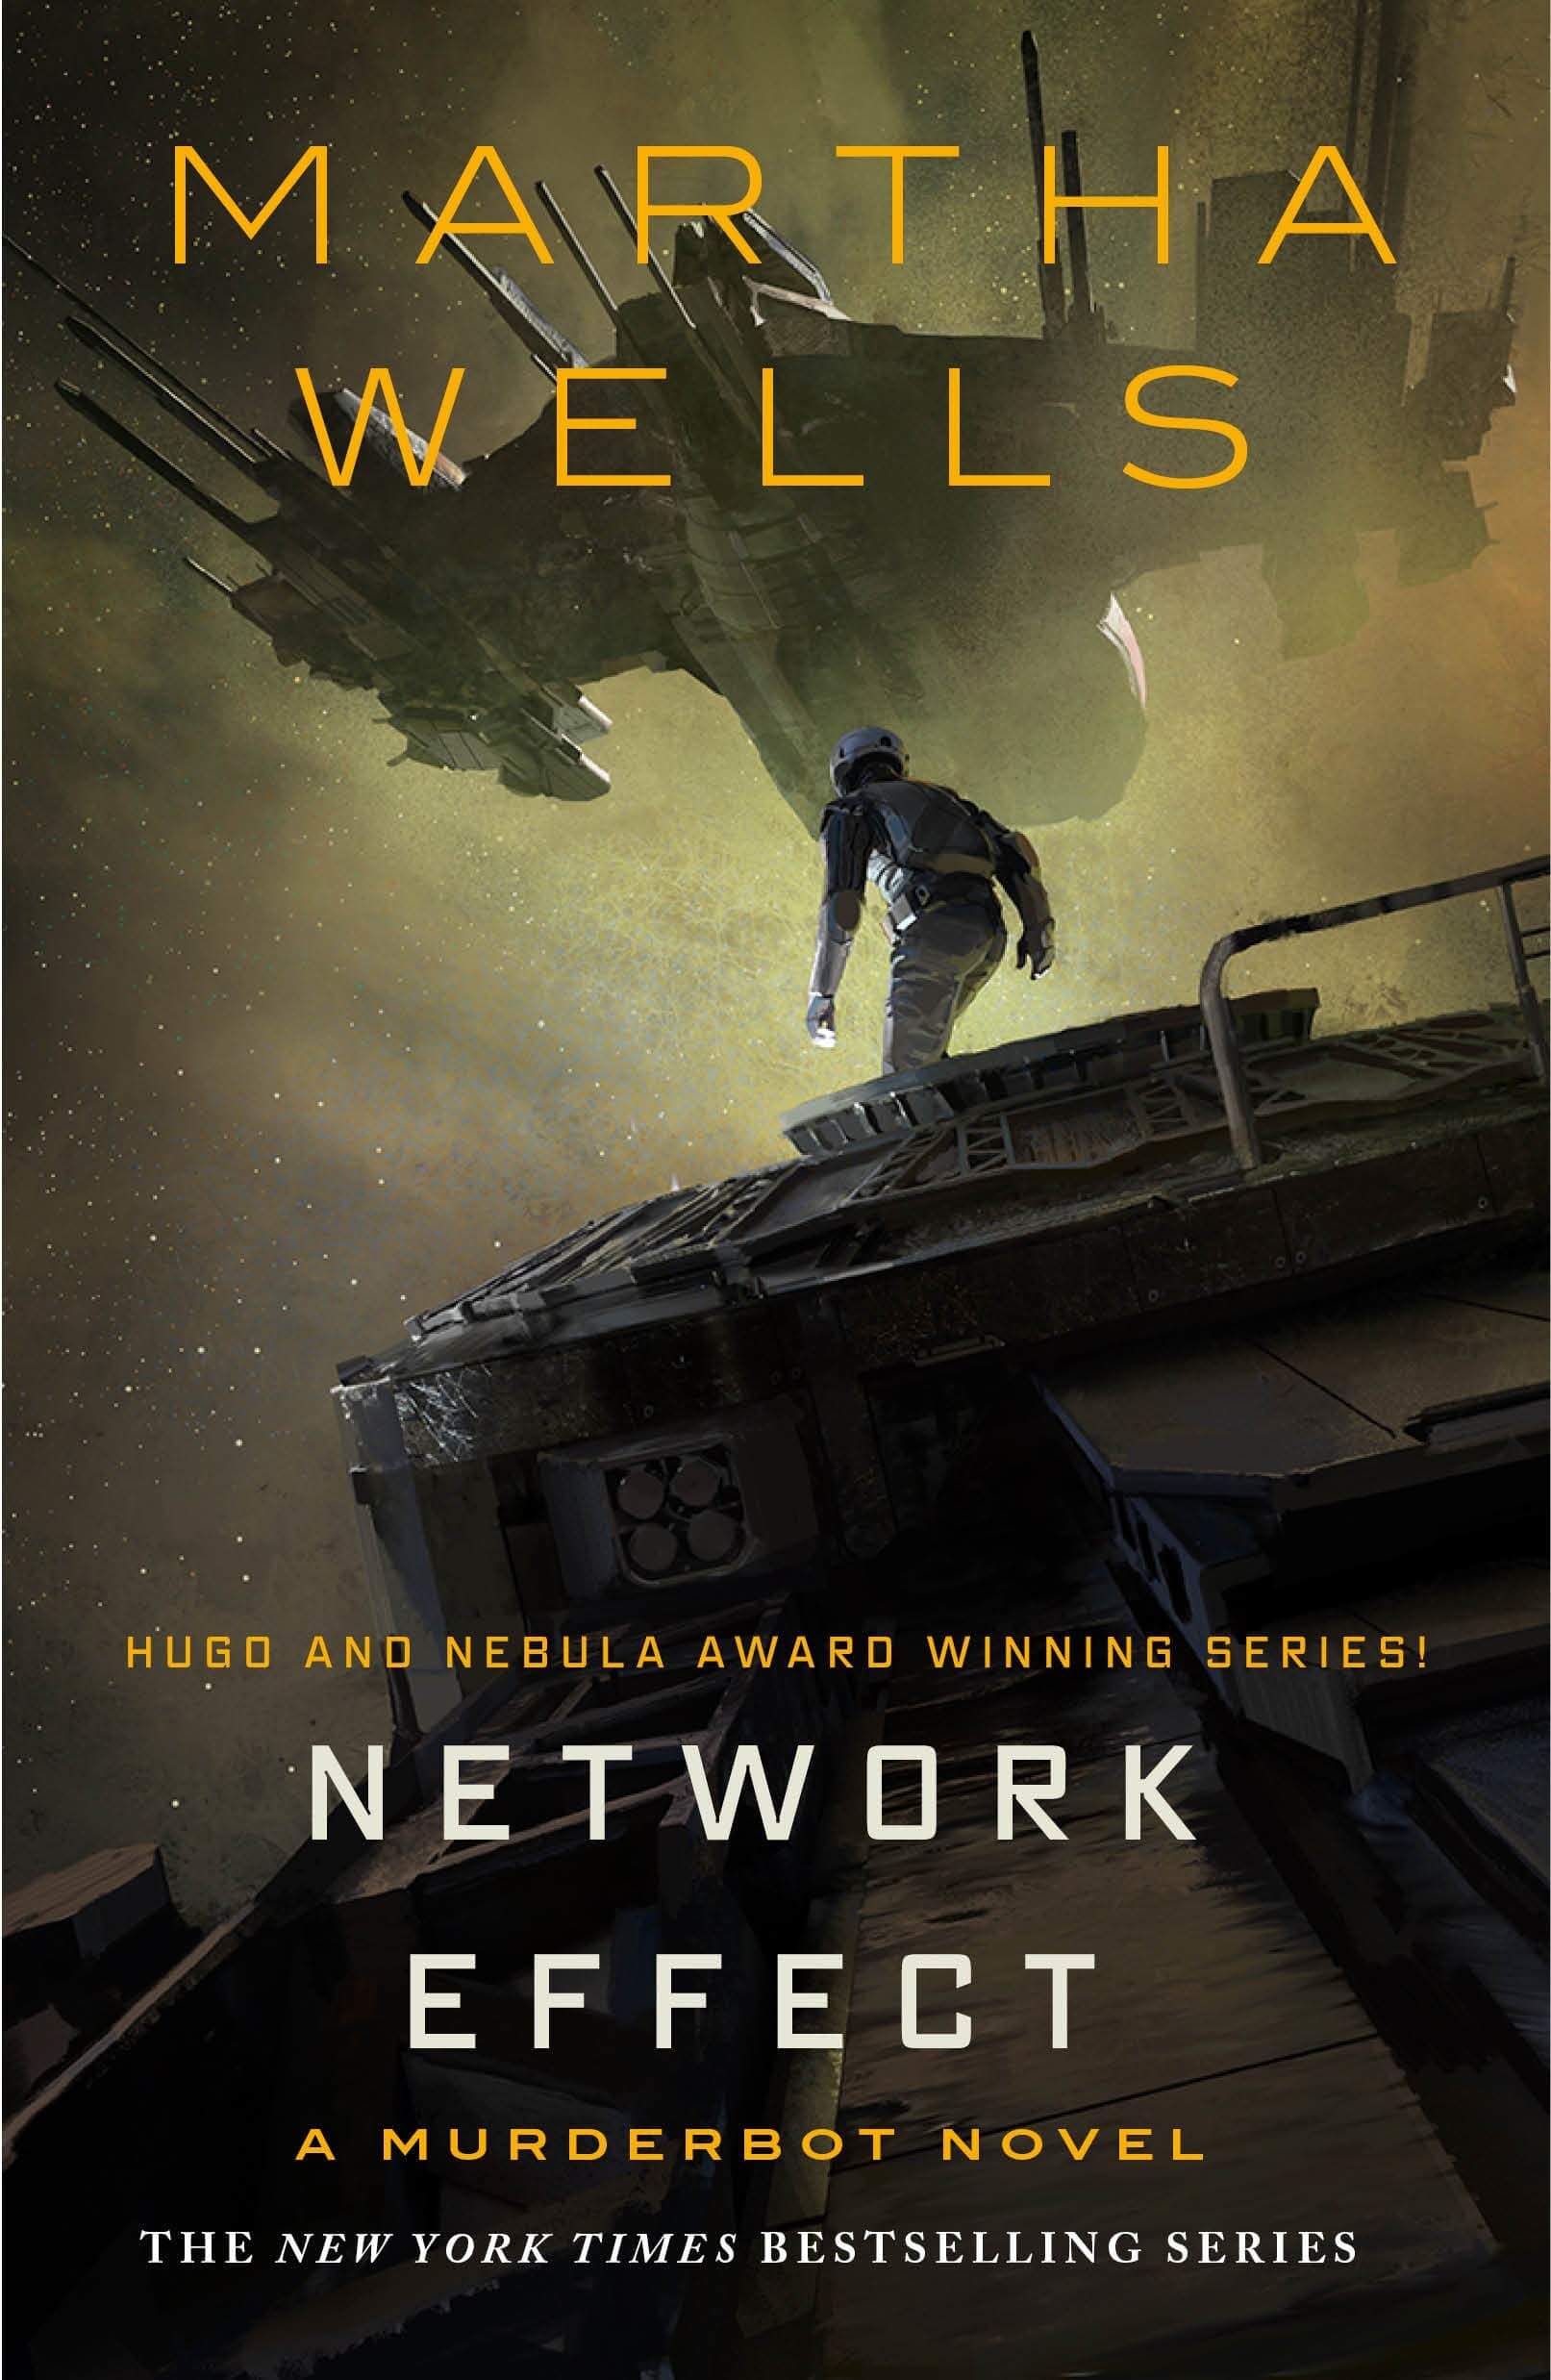 the main character appears to be preapring to jup from one spaceship to another on the cover of Network Effect by Martha Wells